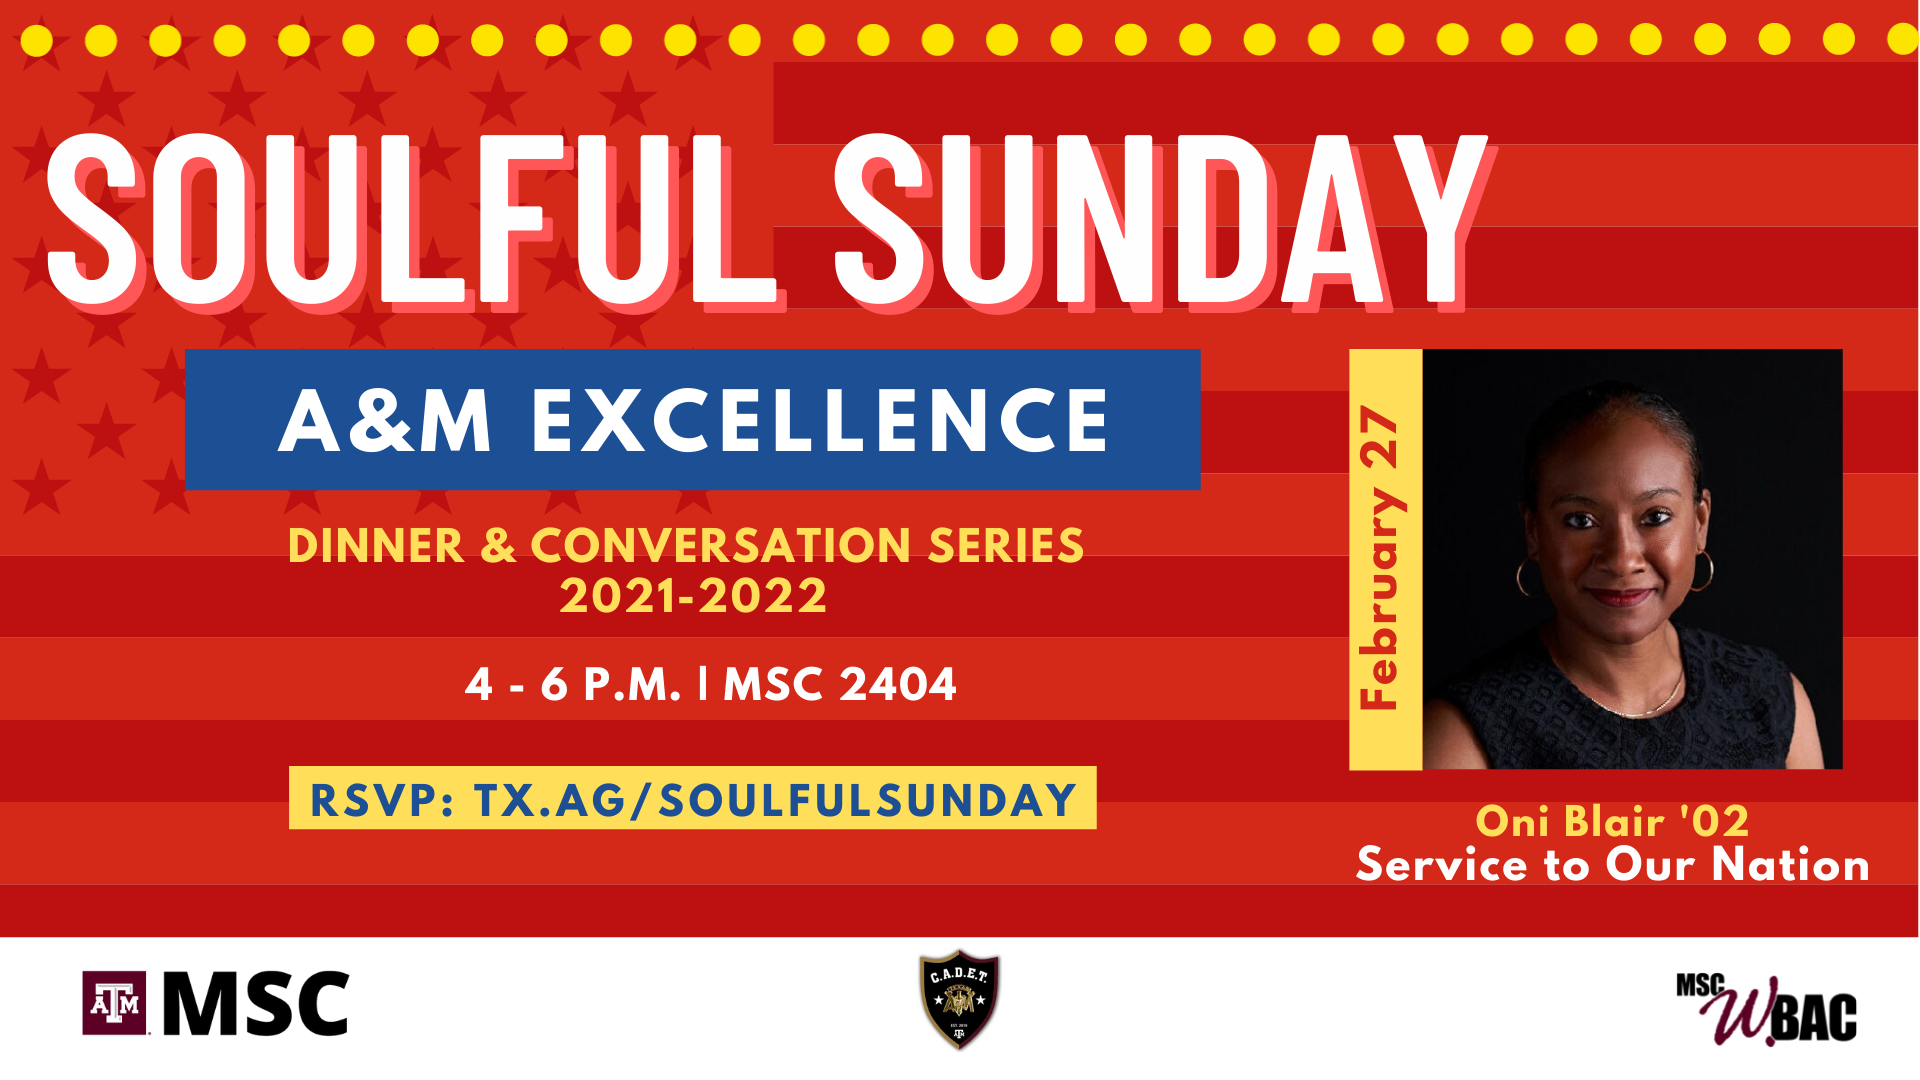 MSC WBAC presents Soulful Sunday, A&M Excellence. Dinner & Conversations Series 2021-2022. February 27, 2022. Oni Blair '02, Service to our Nation. 4 to 6 p.m. at the MSC 2404. RSVP: tx.ag/soulfulsunday